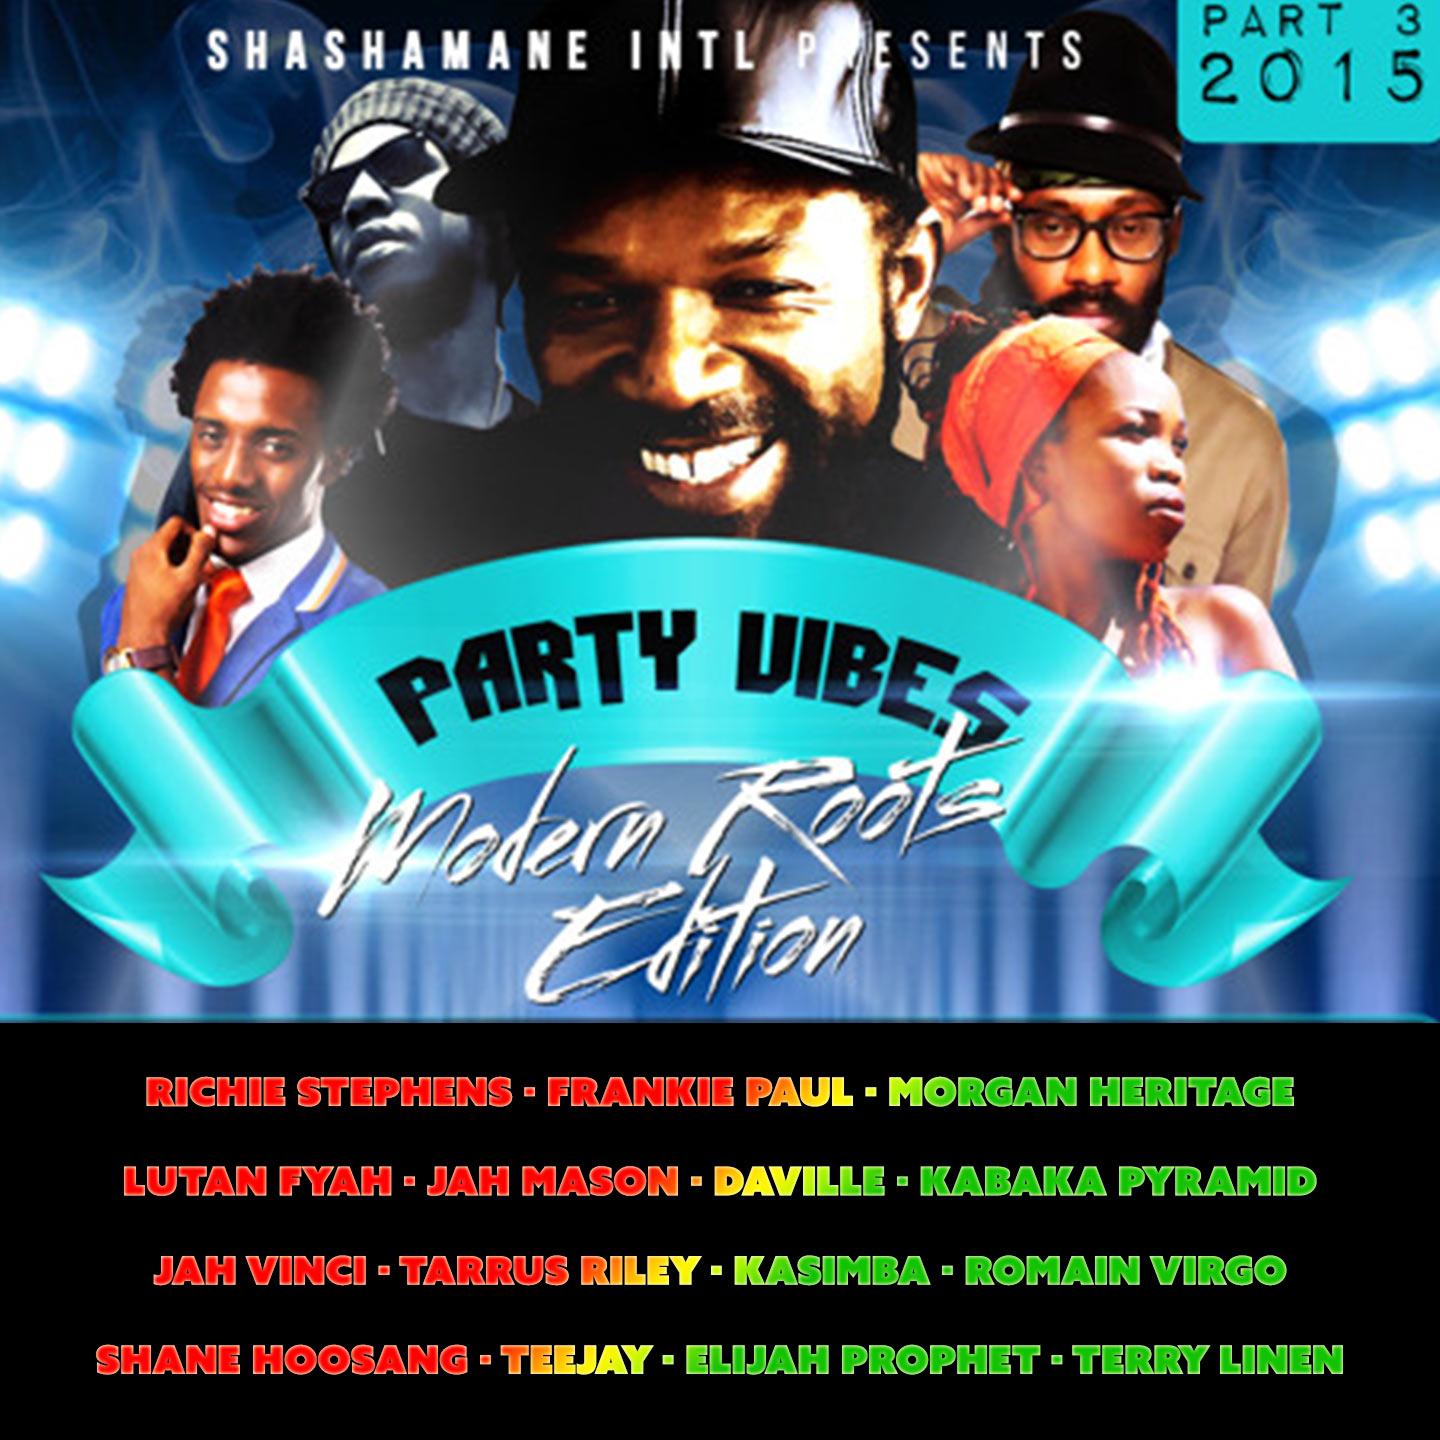 Party Vibes, Vol. 3 (Modern Roots Edition) [Shashamane Intl Presents]